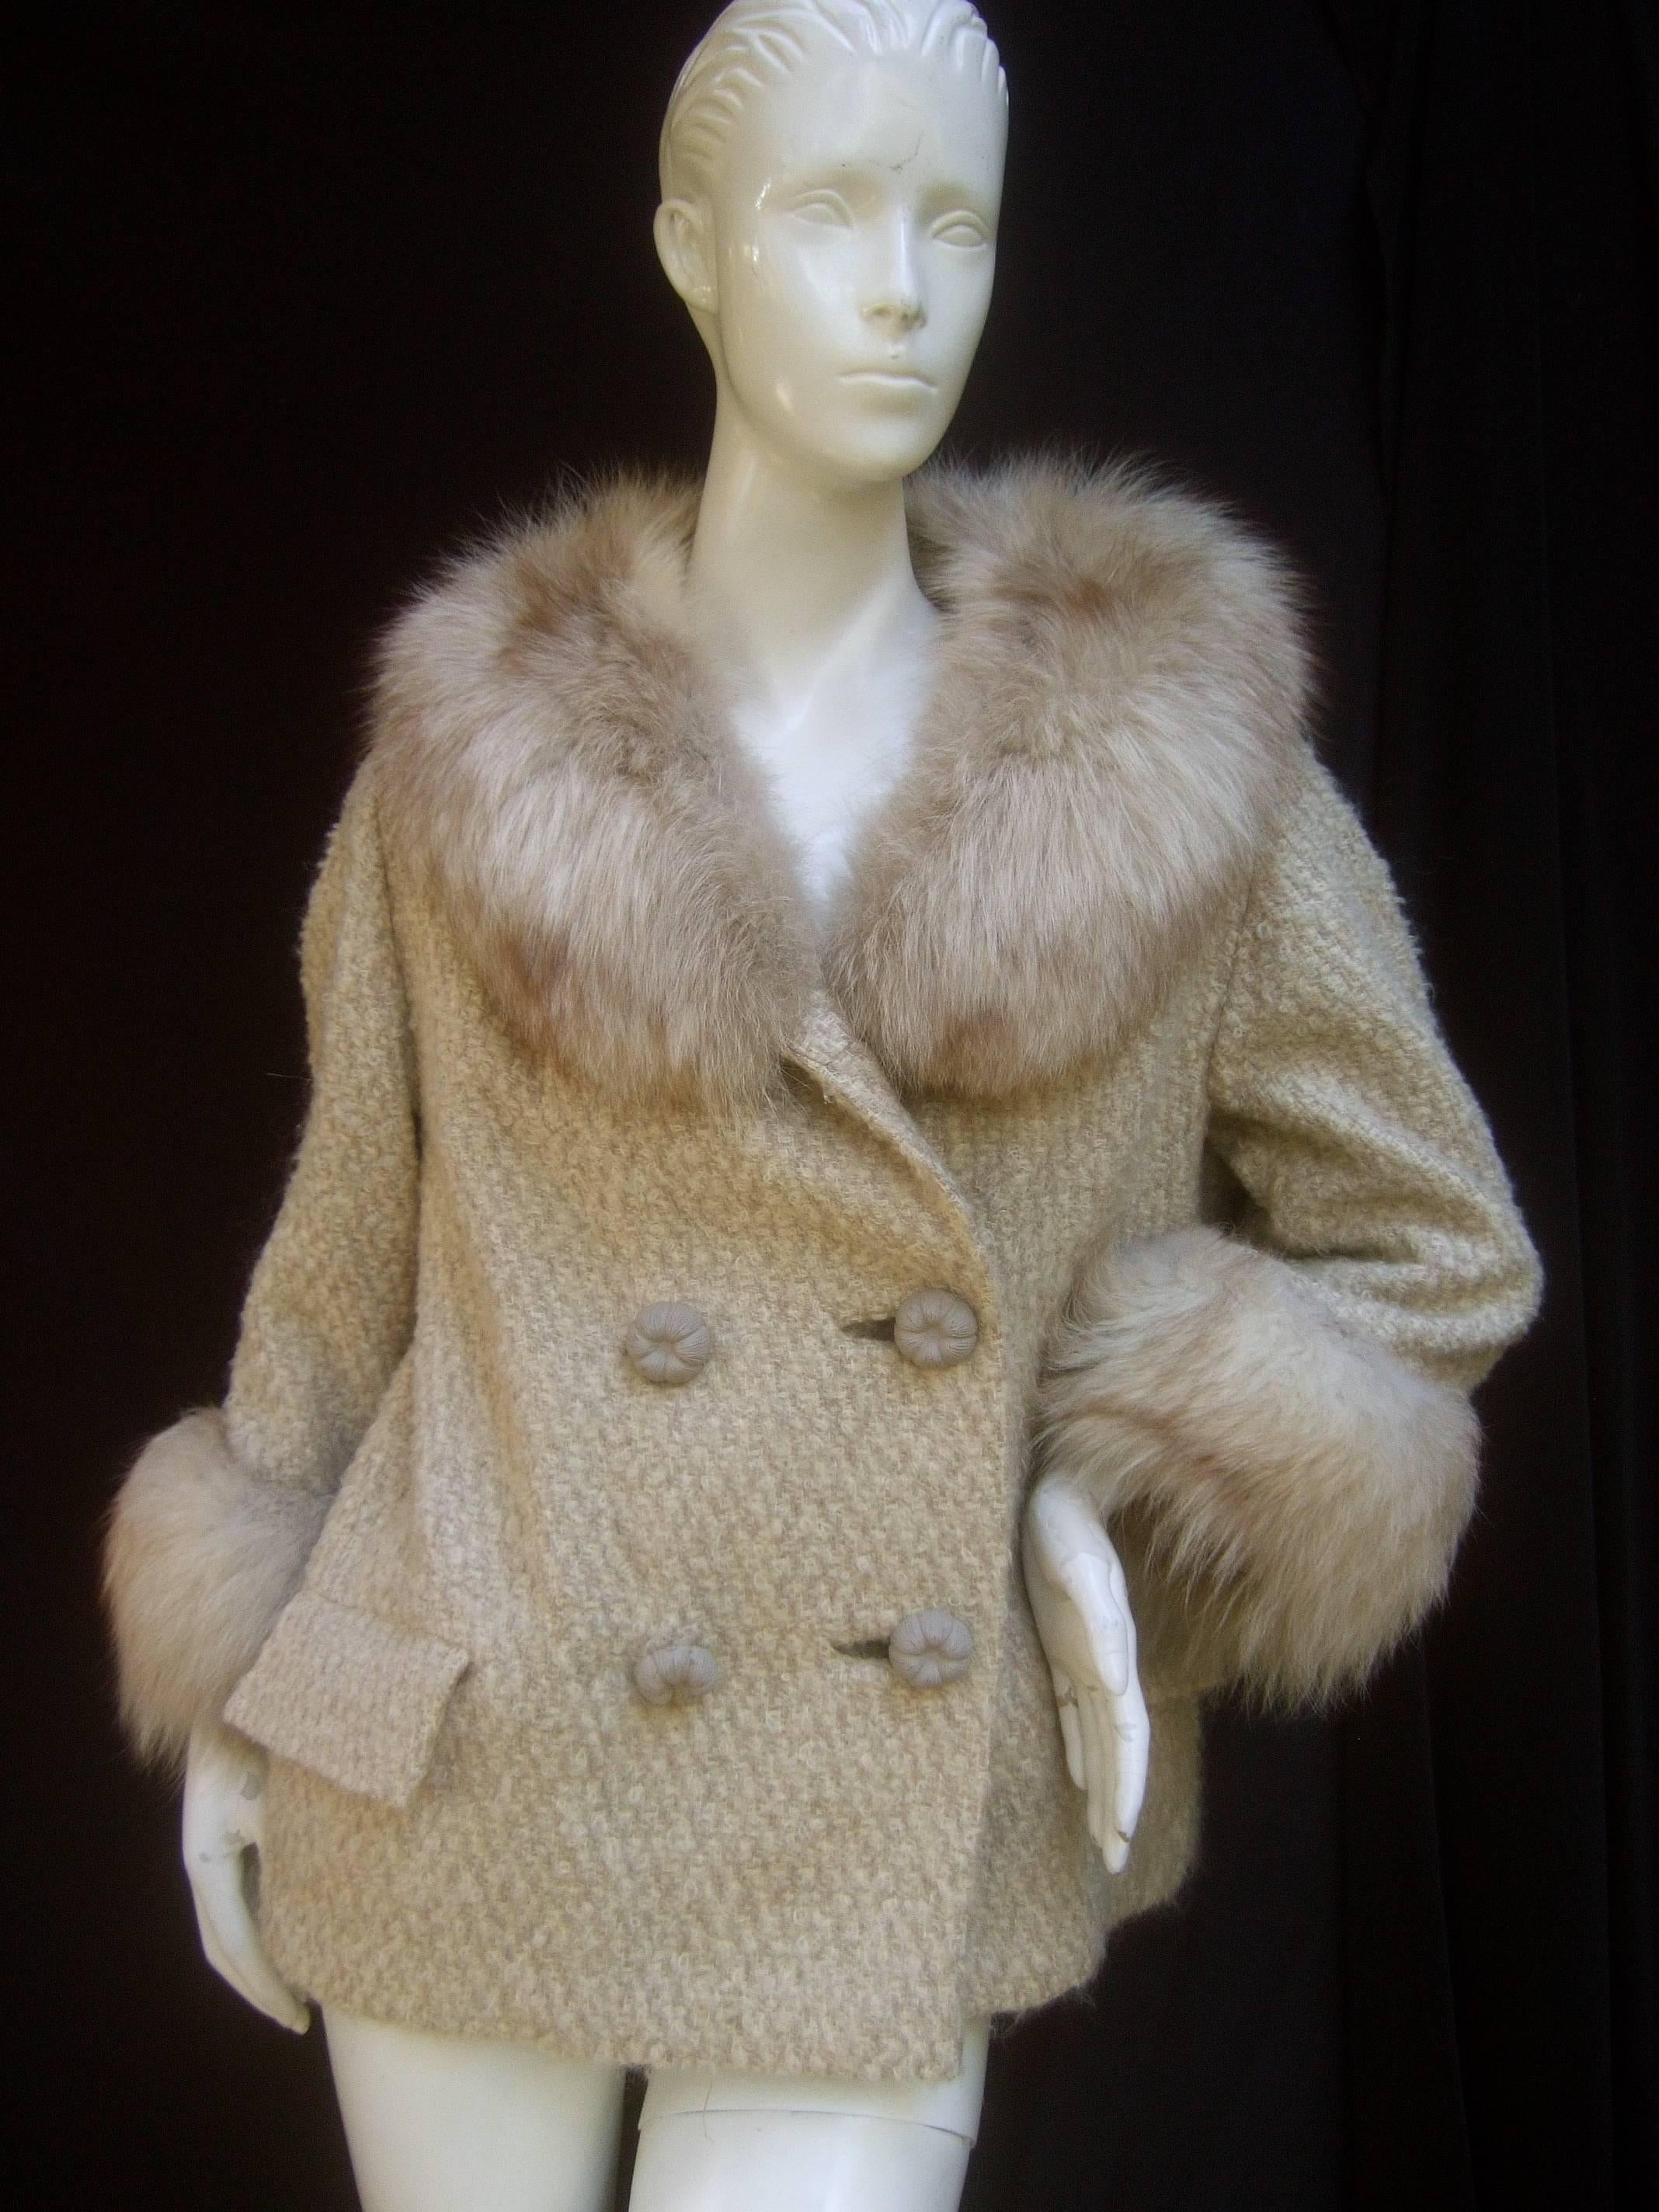 Neiman Marcus fox trim ivory boucle wool knit jacket c 1970s
The stylish retro jacket is designed with a voluminous 
dramatic fluffy fox fur collar and cuffs 

The chunky wool knit fabric is a ivory / oatmeal color
Buttons with a set of large scale